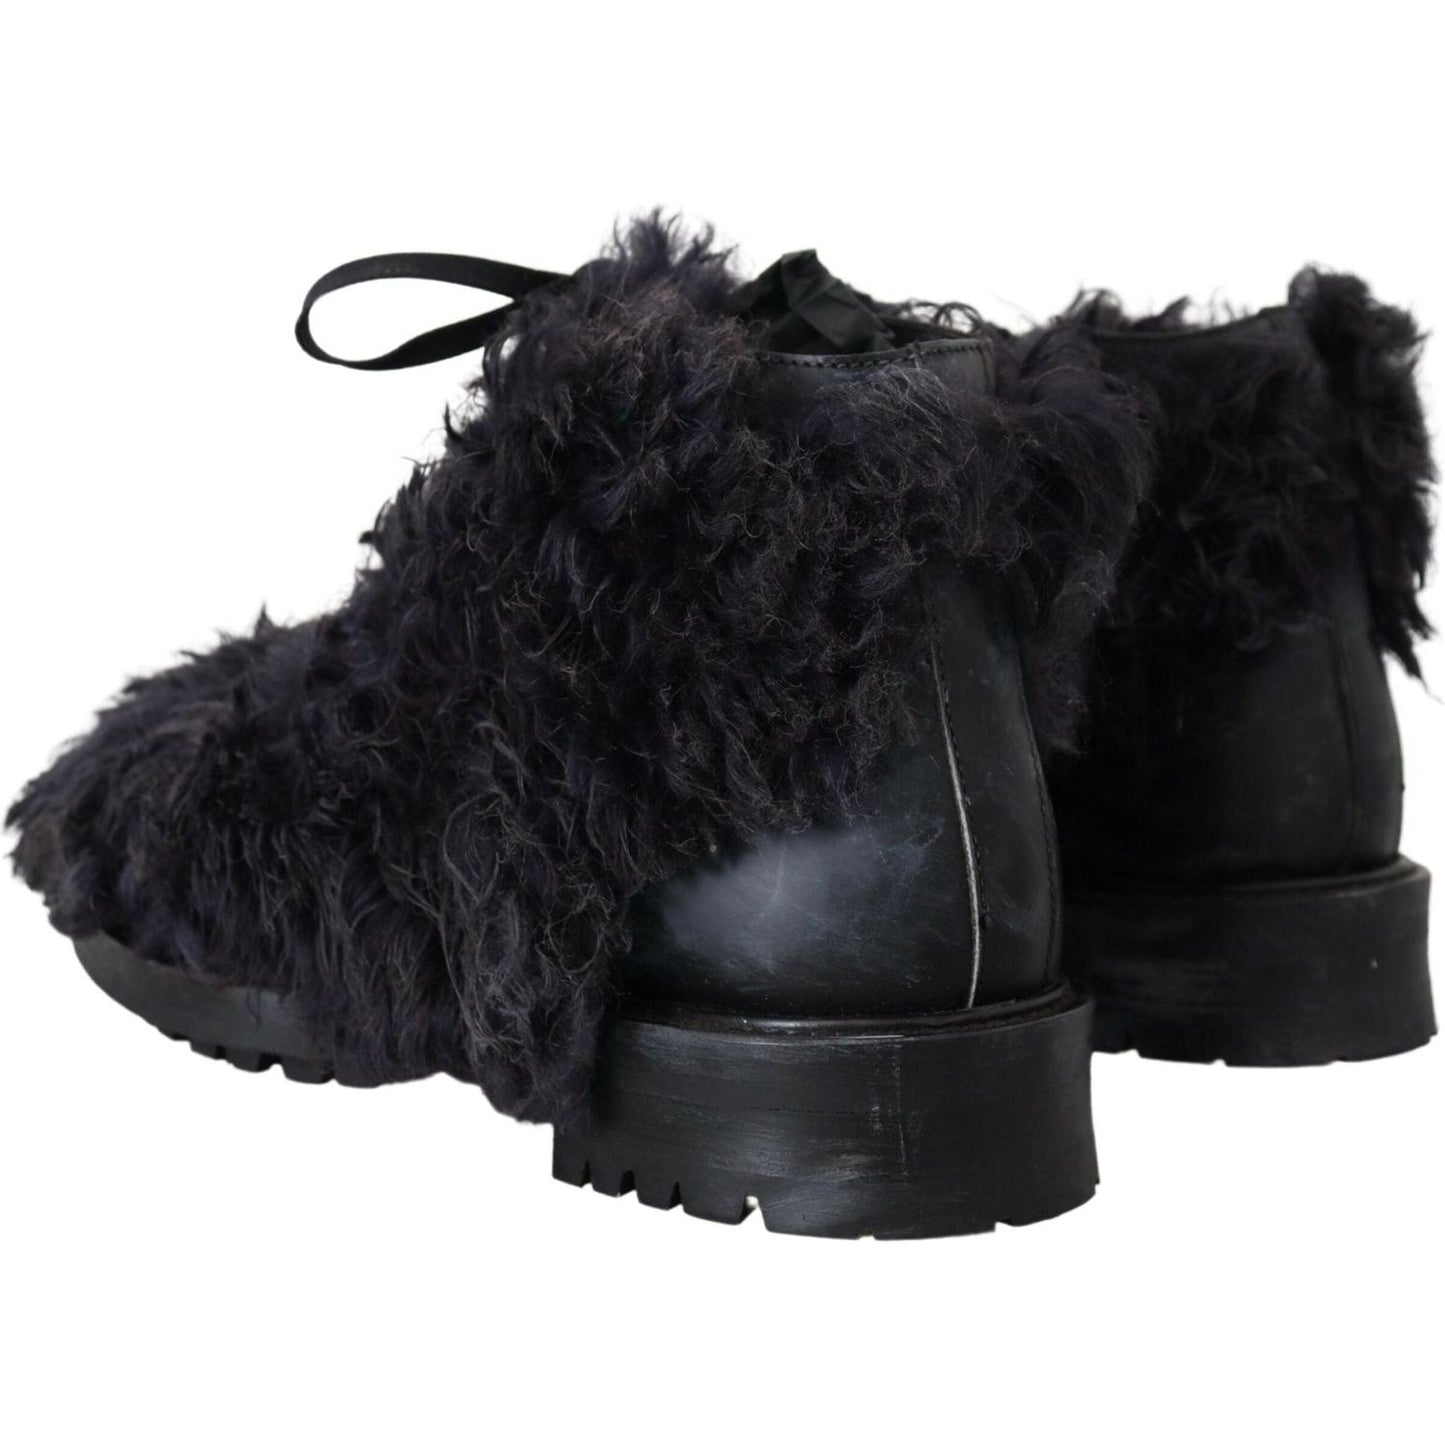 Dolce & Gabbana Black Leather Shearling Ankle Boots black-leather-combat-shearling-boots-shoes